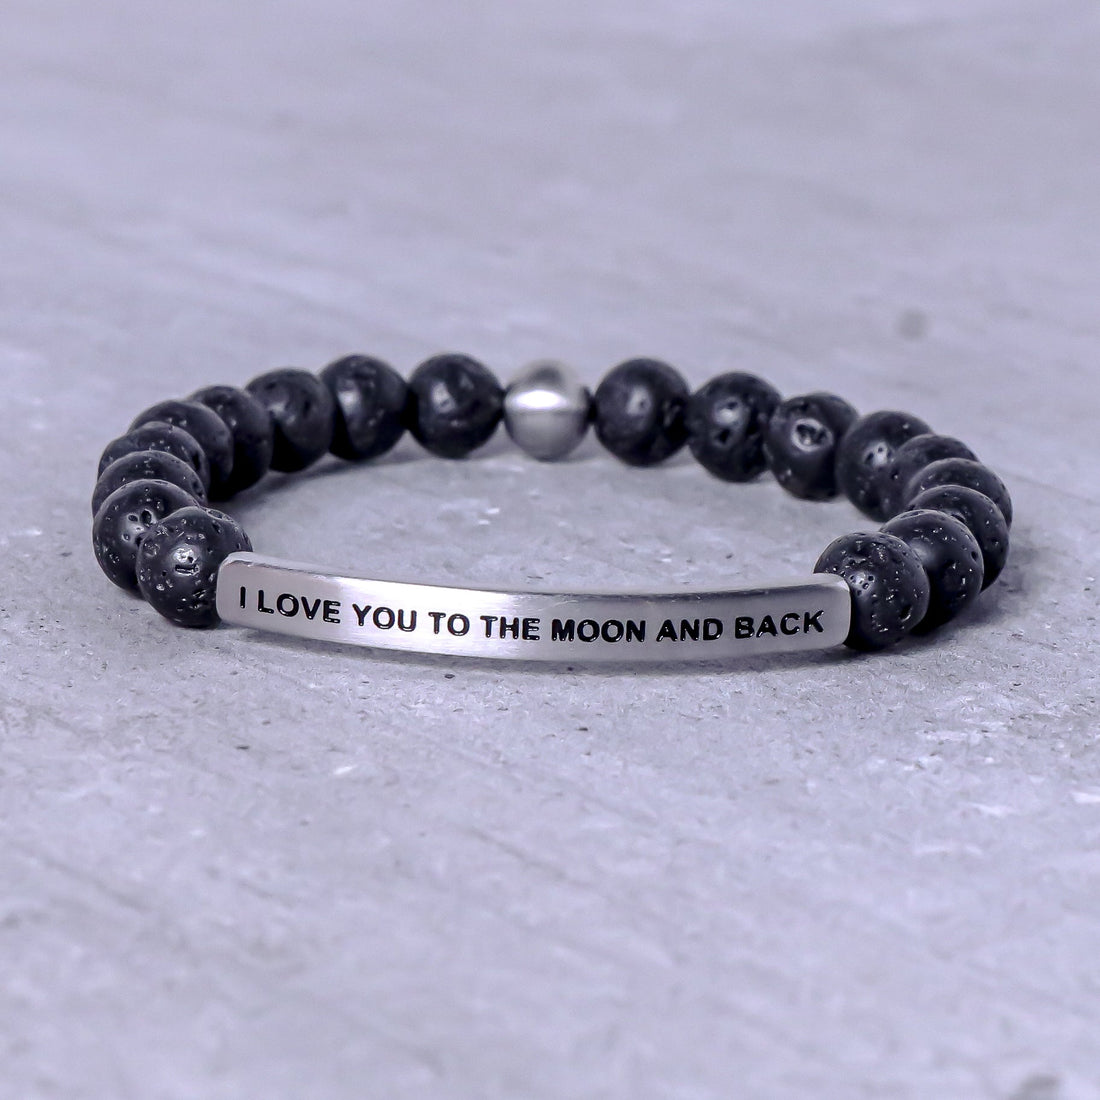 I LOVE YOU TO THE MOON AND BACK- Mens Collection - Inspiration Co.